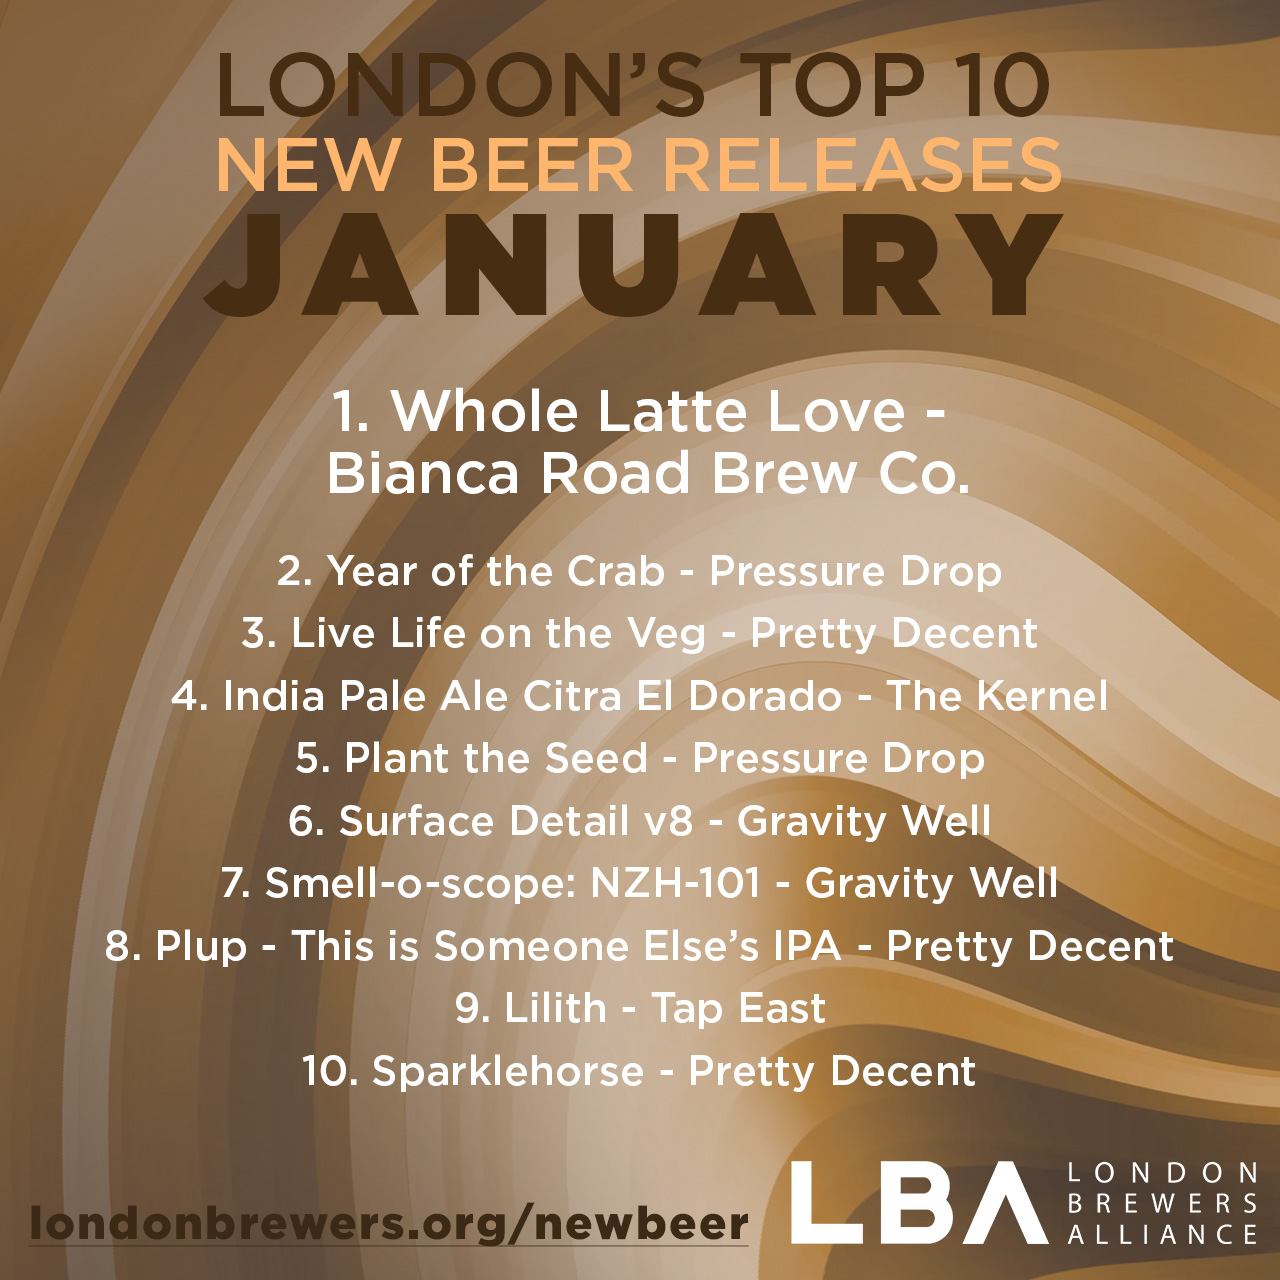 January's Top 10 New Beer Releases - London Edition